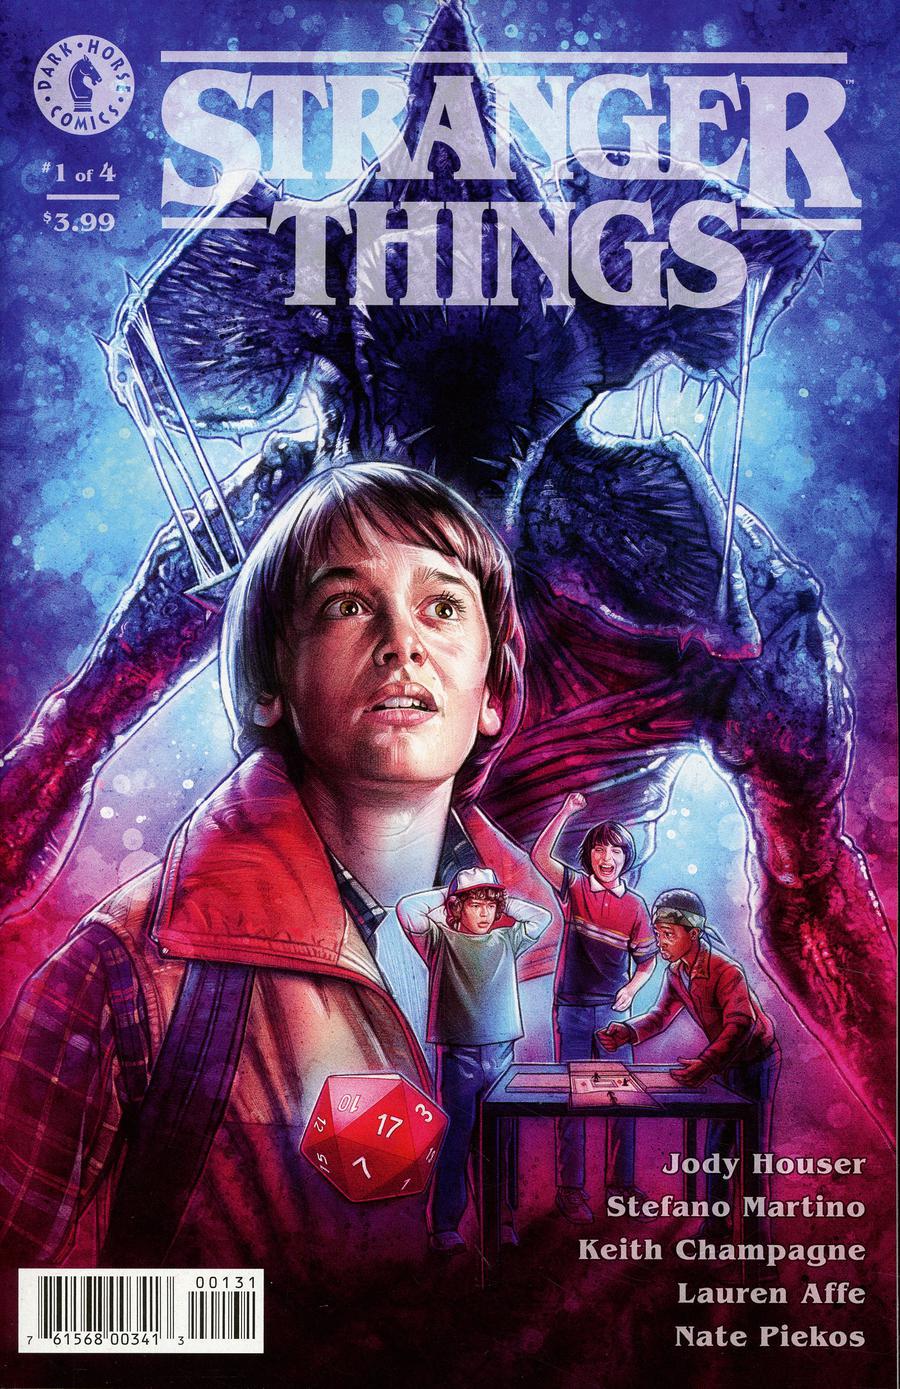 Stranger Things #1 Cover G DF Kyle Lambert Cover Signed By Keith Champagne